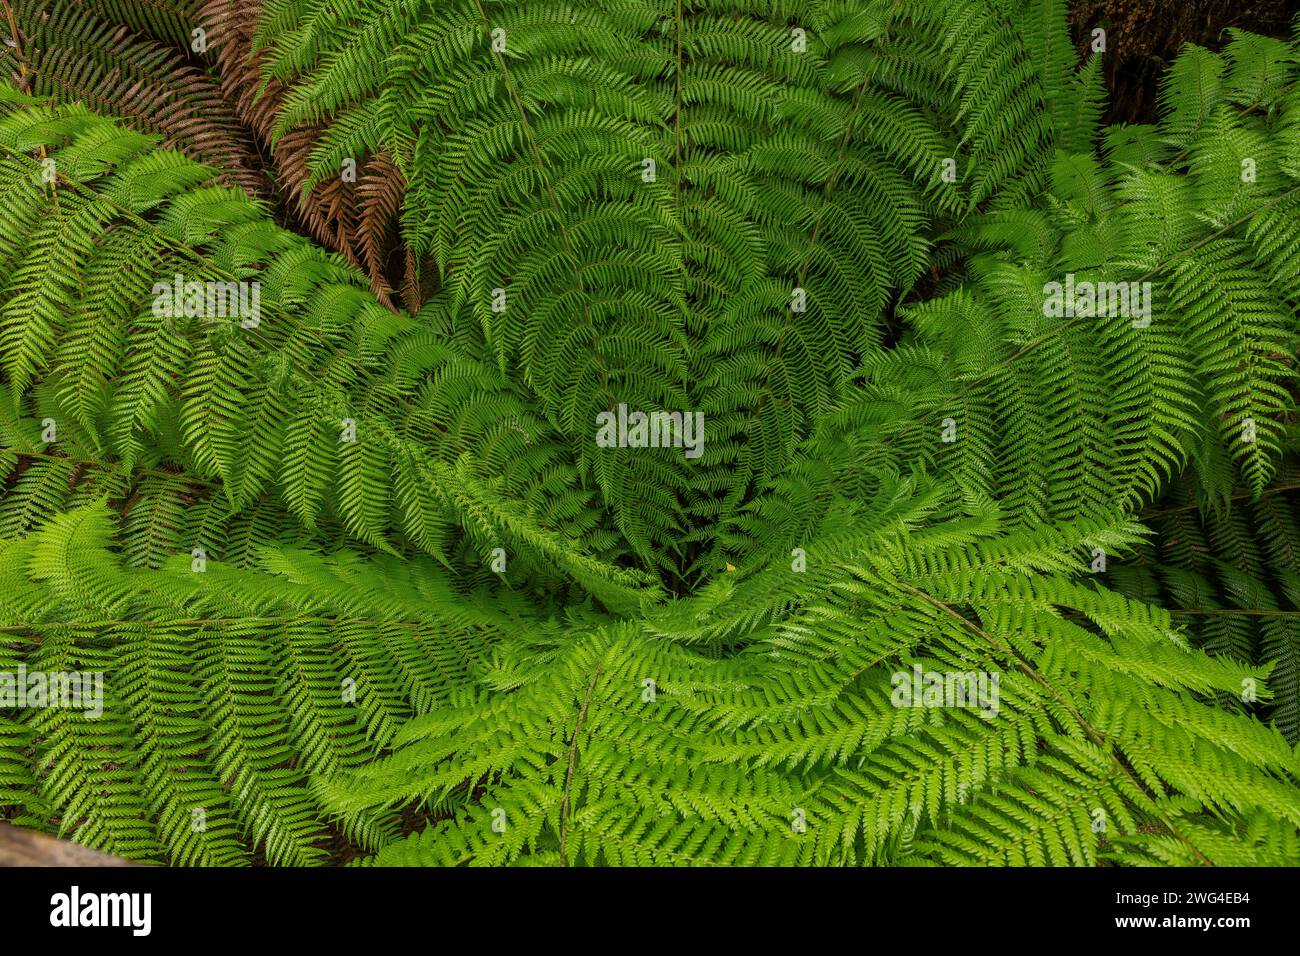 Fronds of Soft tree fern, Dicksonia antarctica, in Melba Gully, temperate rain forest, Victoria. Stock Photo